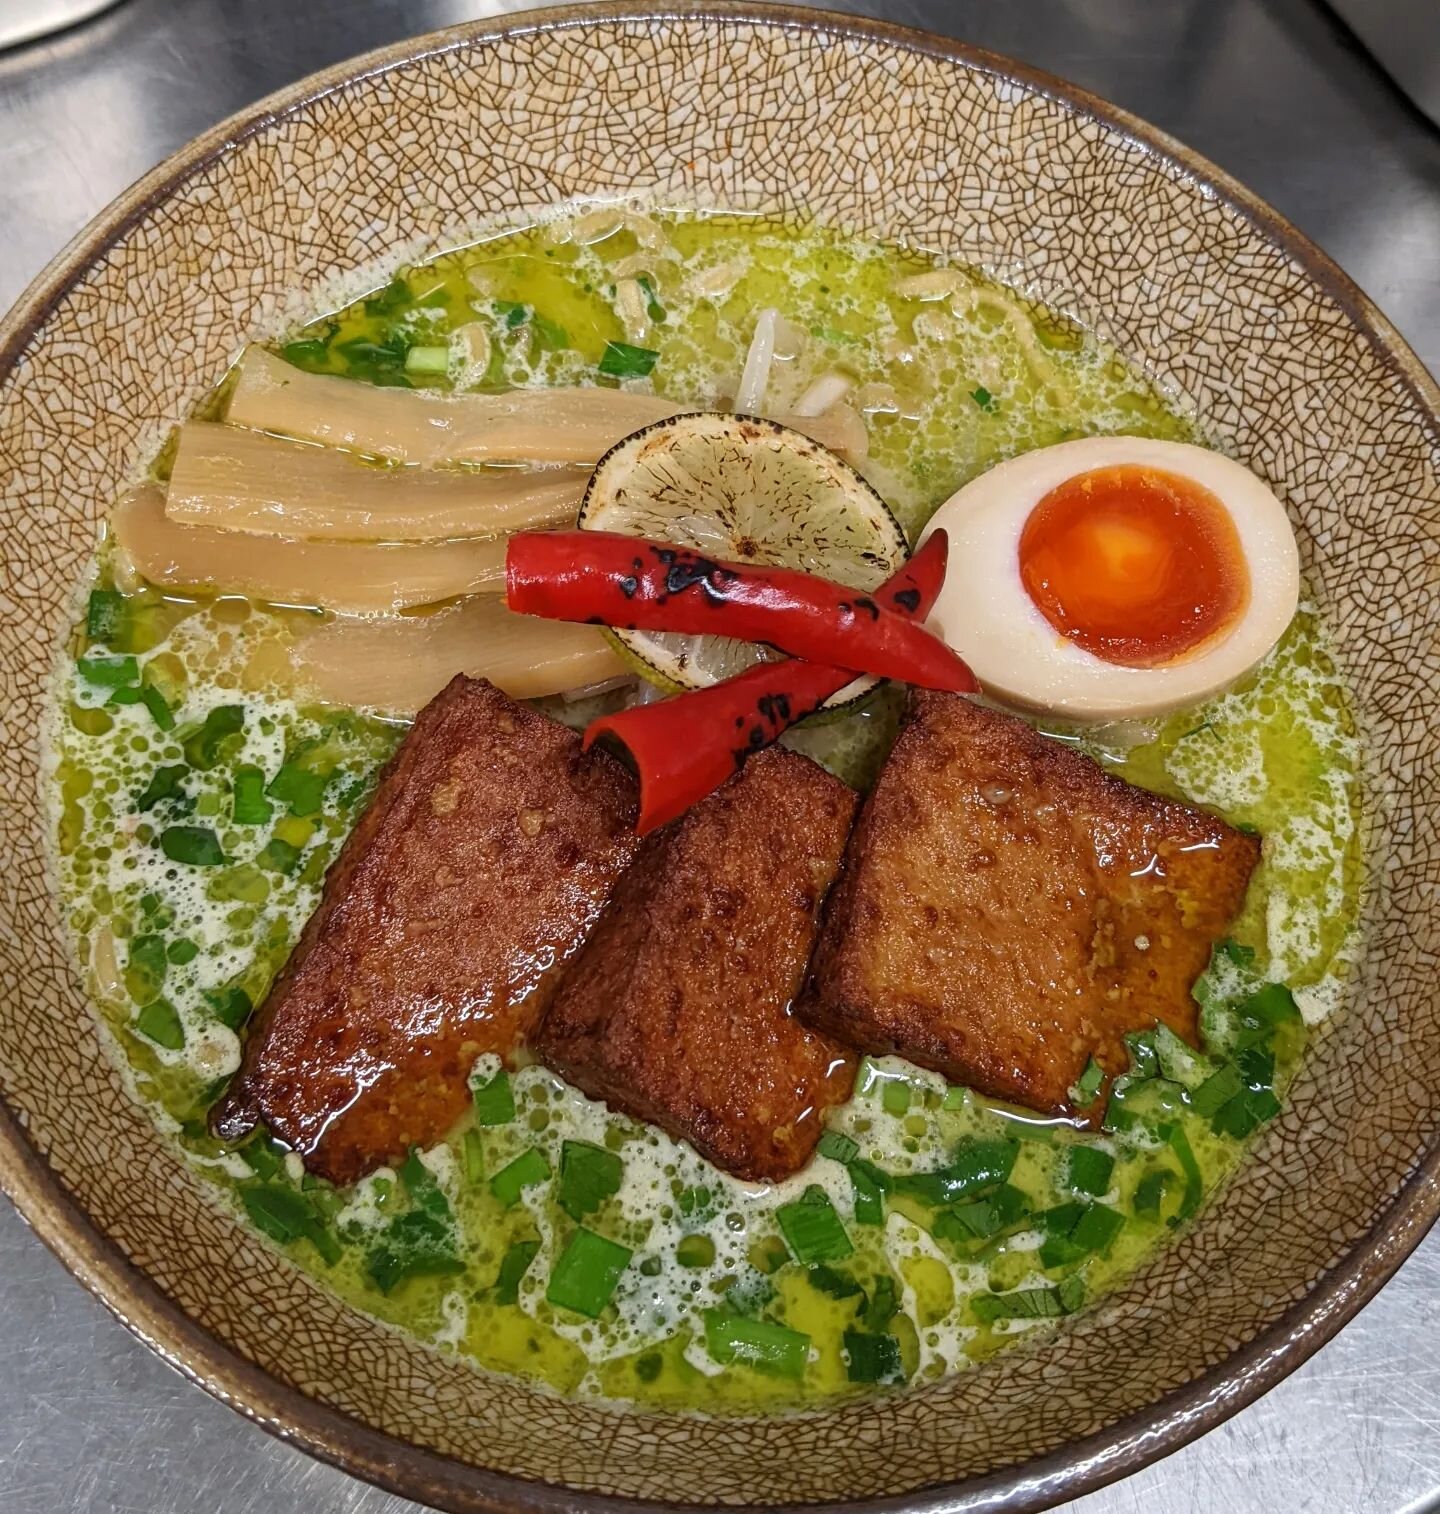 Our special this week is a green herb shoyu created by our kitchen team member Jake. Jake is only 19 but is learning fast - a really hard worker who is dedicated to the craft.